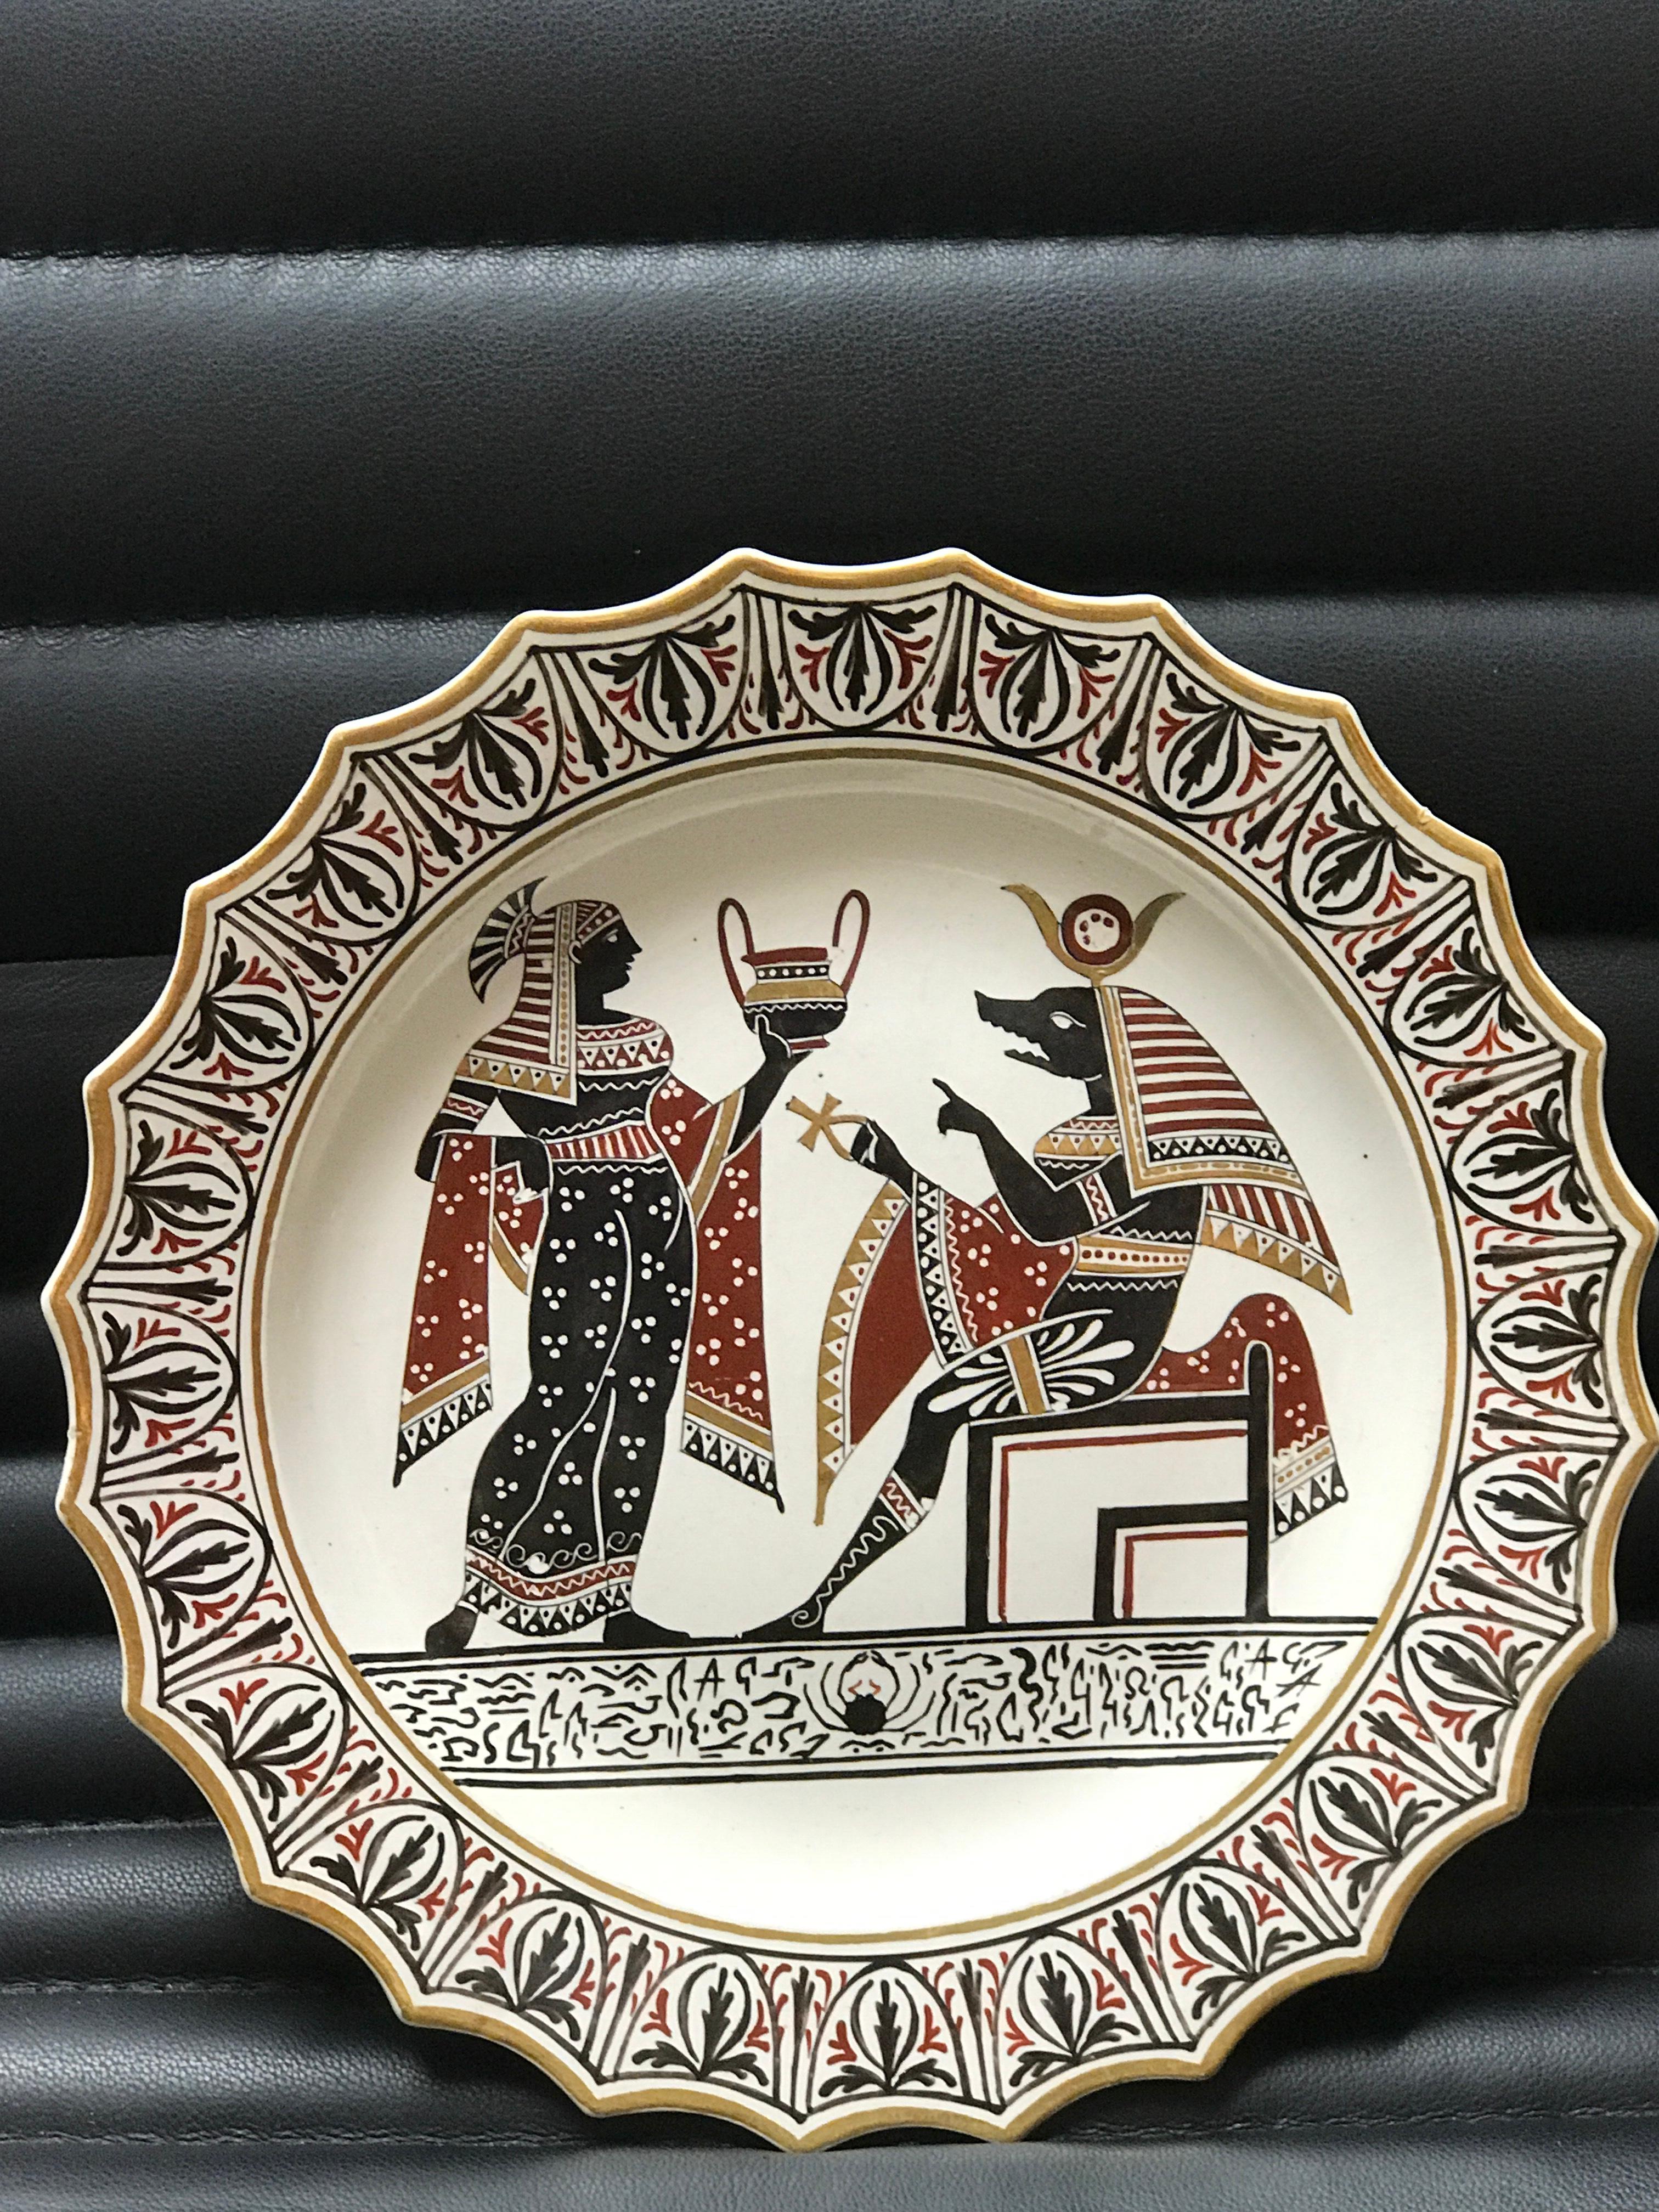 Giustiniani Egyptomania pottery plate with Anubis and gilt highlights
Neapolitan manufacture (Biagio Giustiniani & Sons) dated to 1830-1840, impressed script Giustiniani and other characters.
 